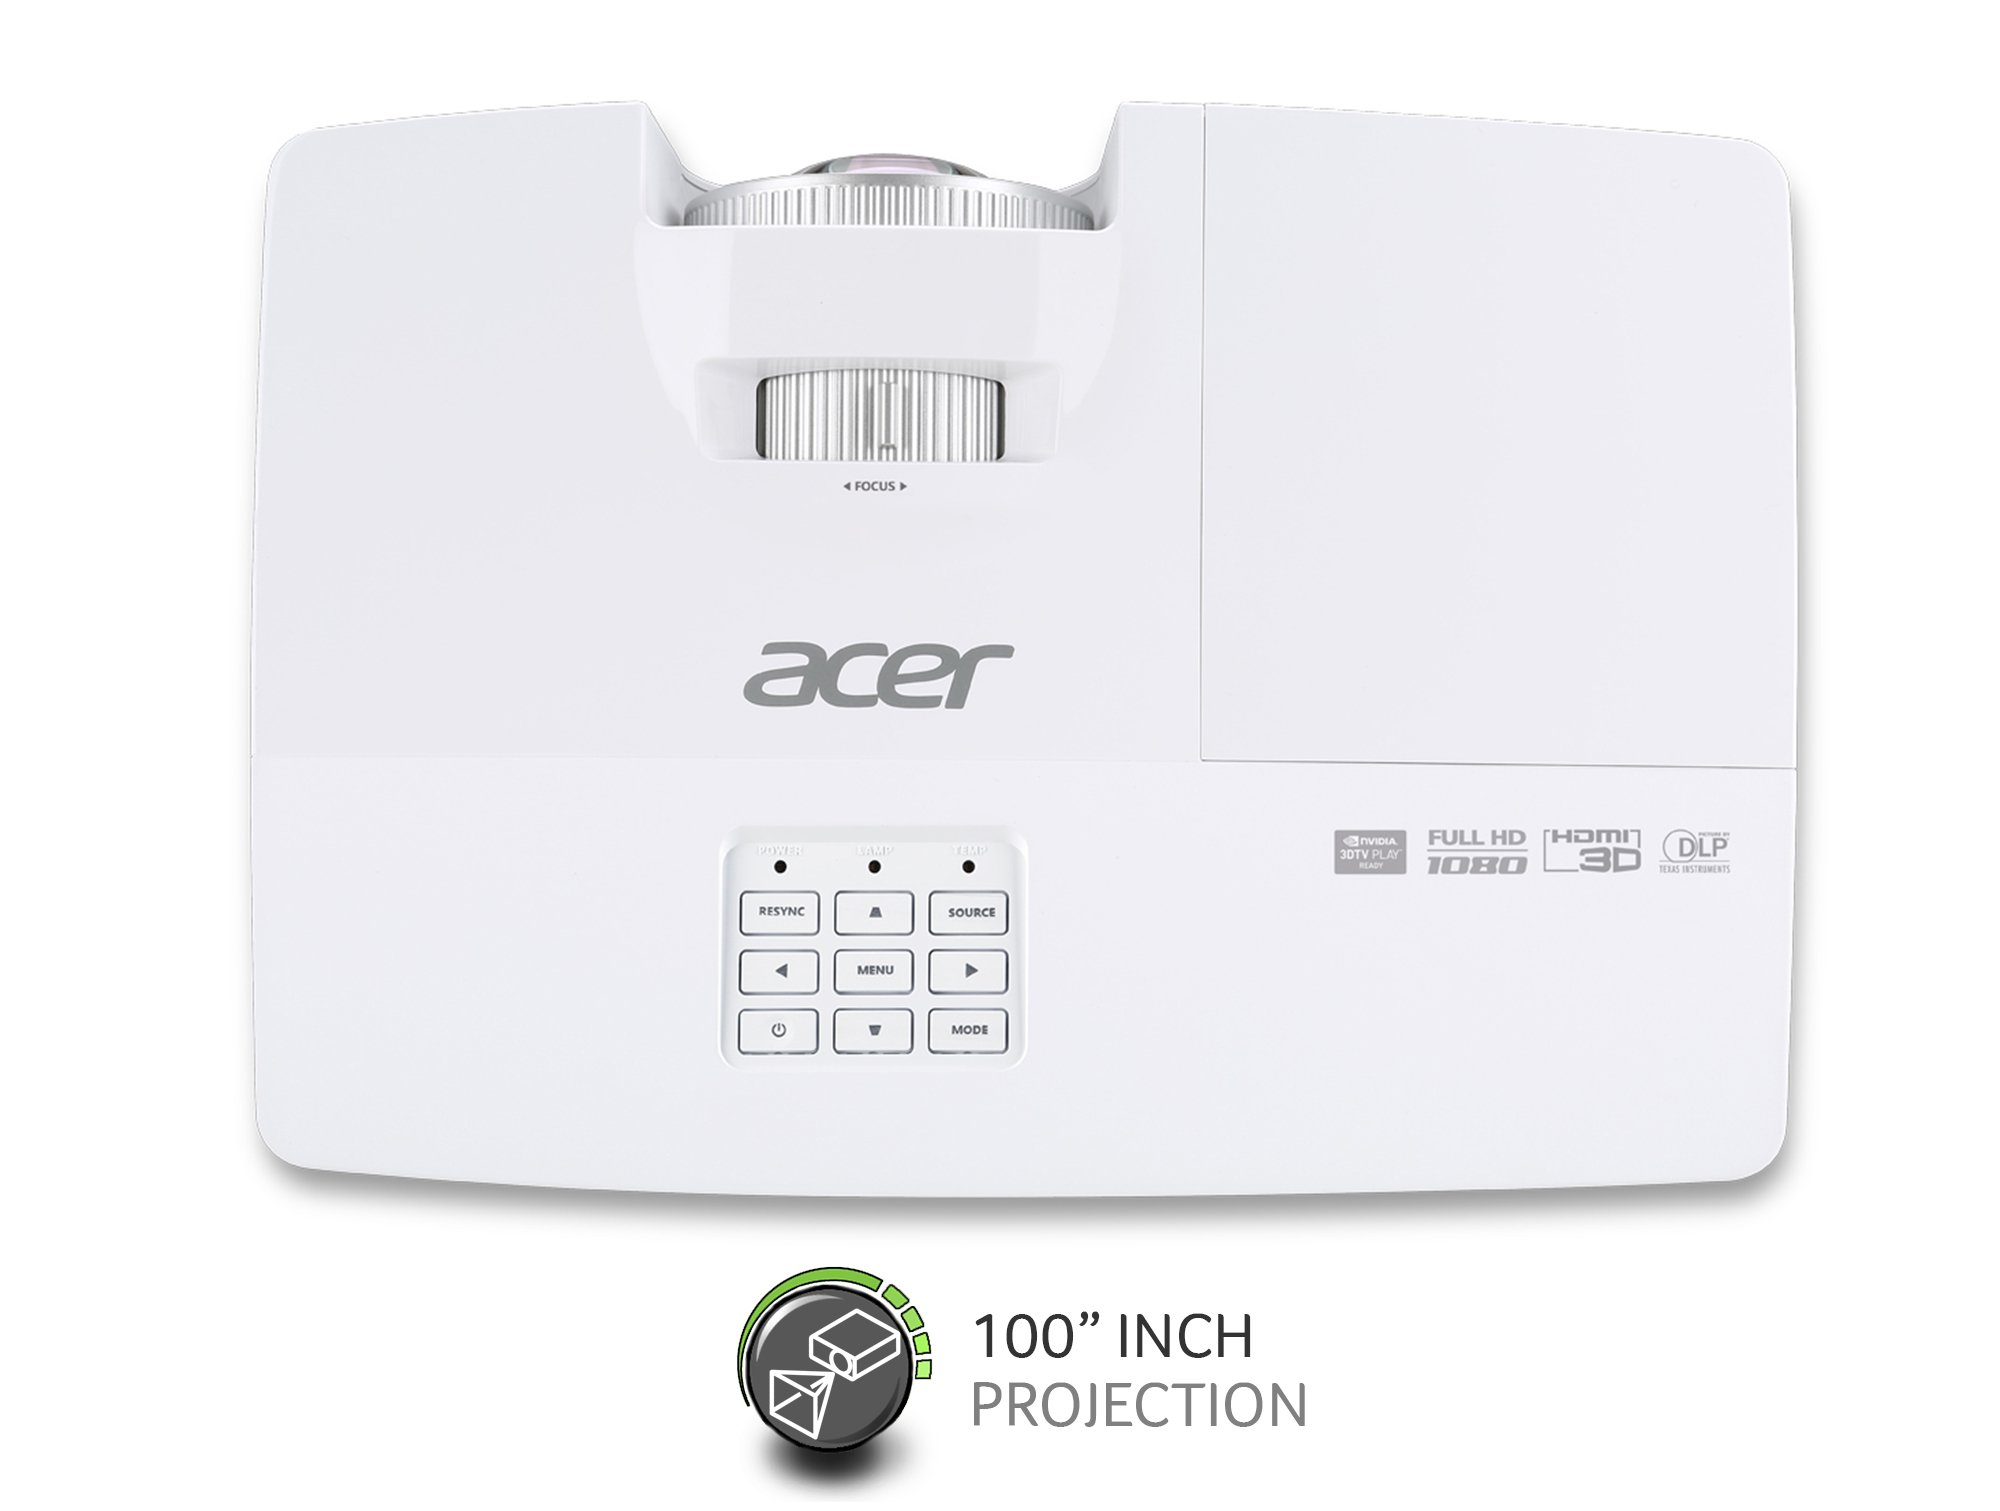 Acer H6517 Full HD 3D Short Throw Projector Reviews